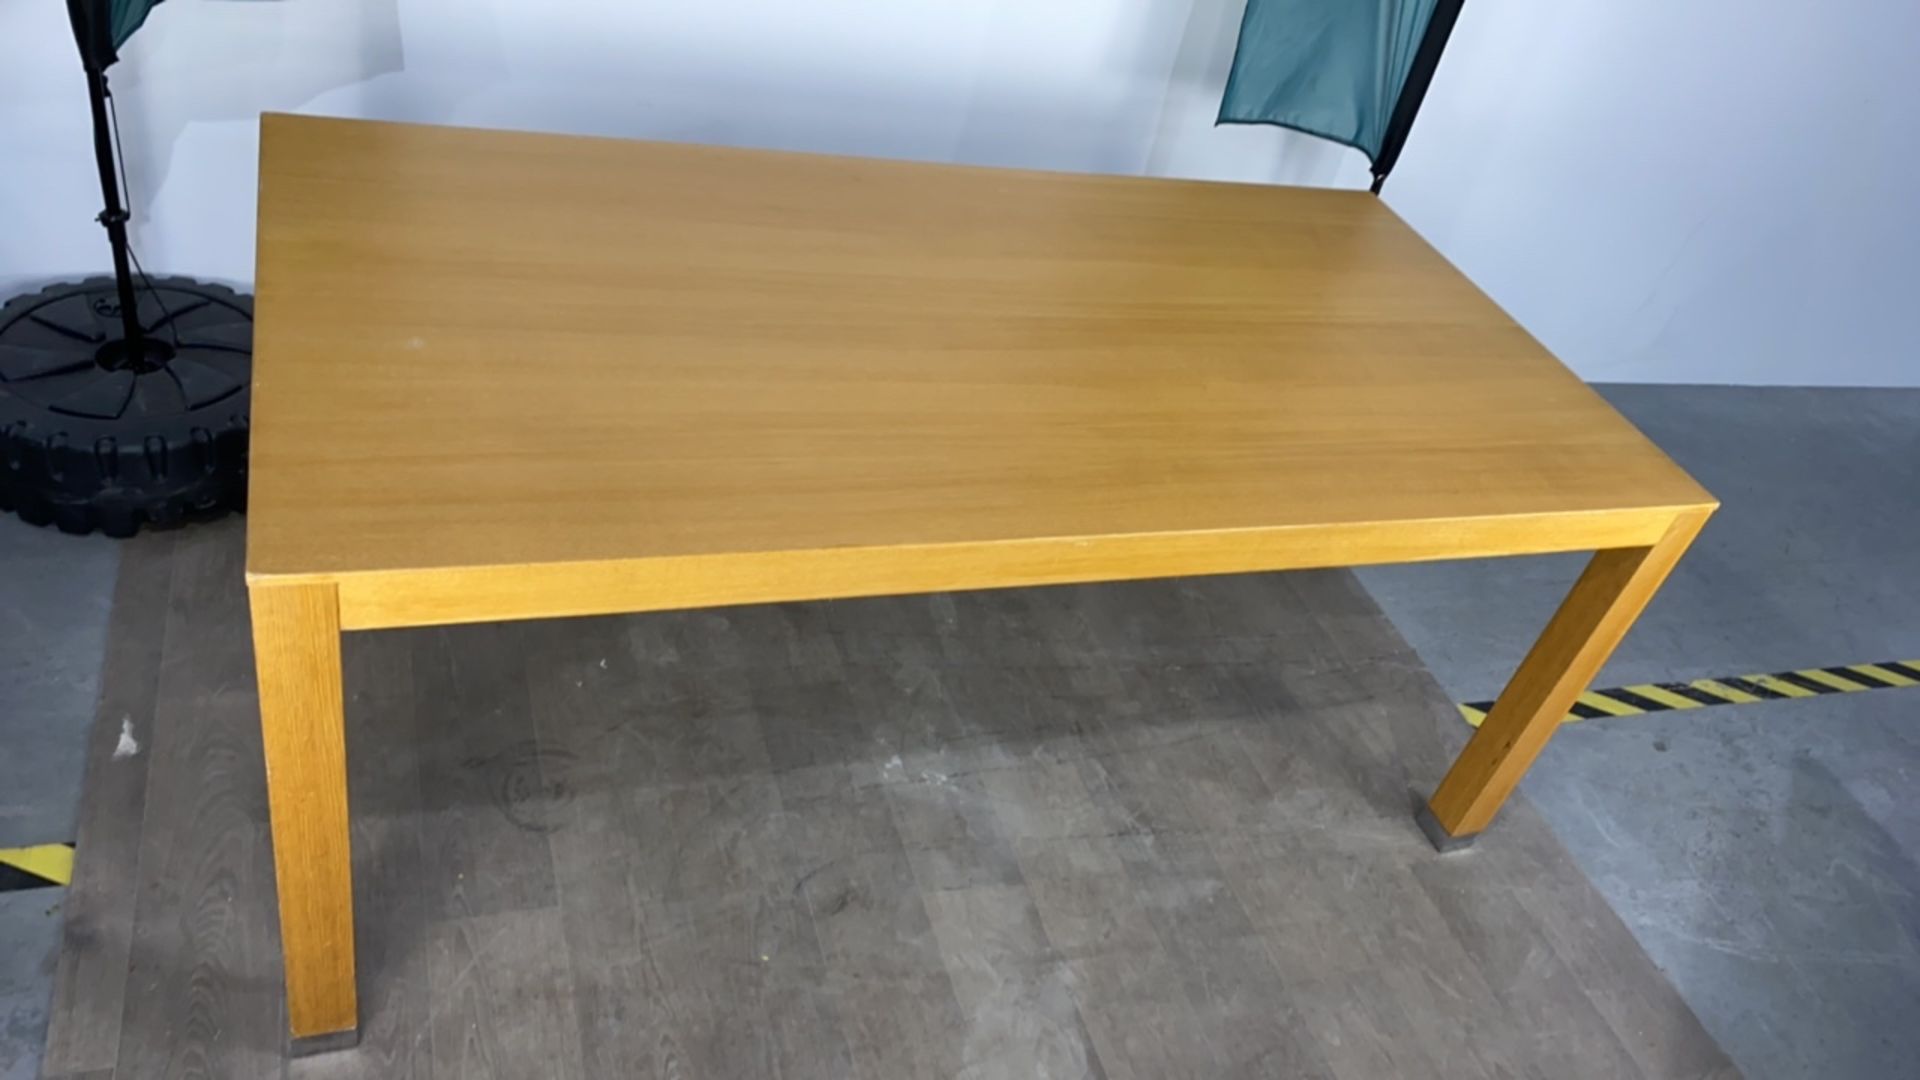 Large Wooden Table With Chromed Feet - Image 3 of 10